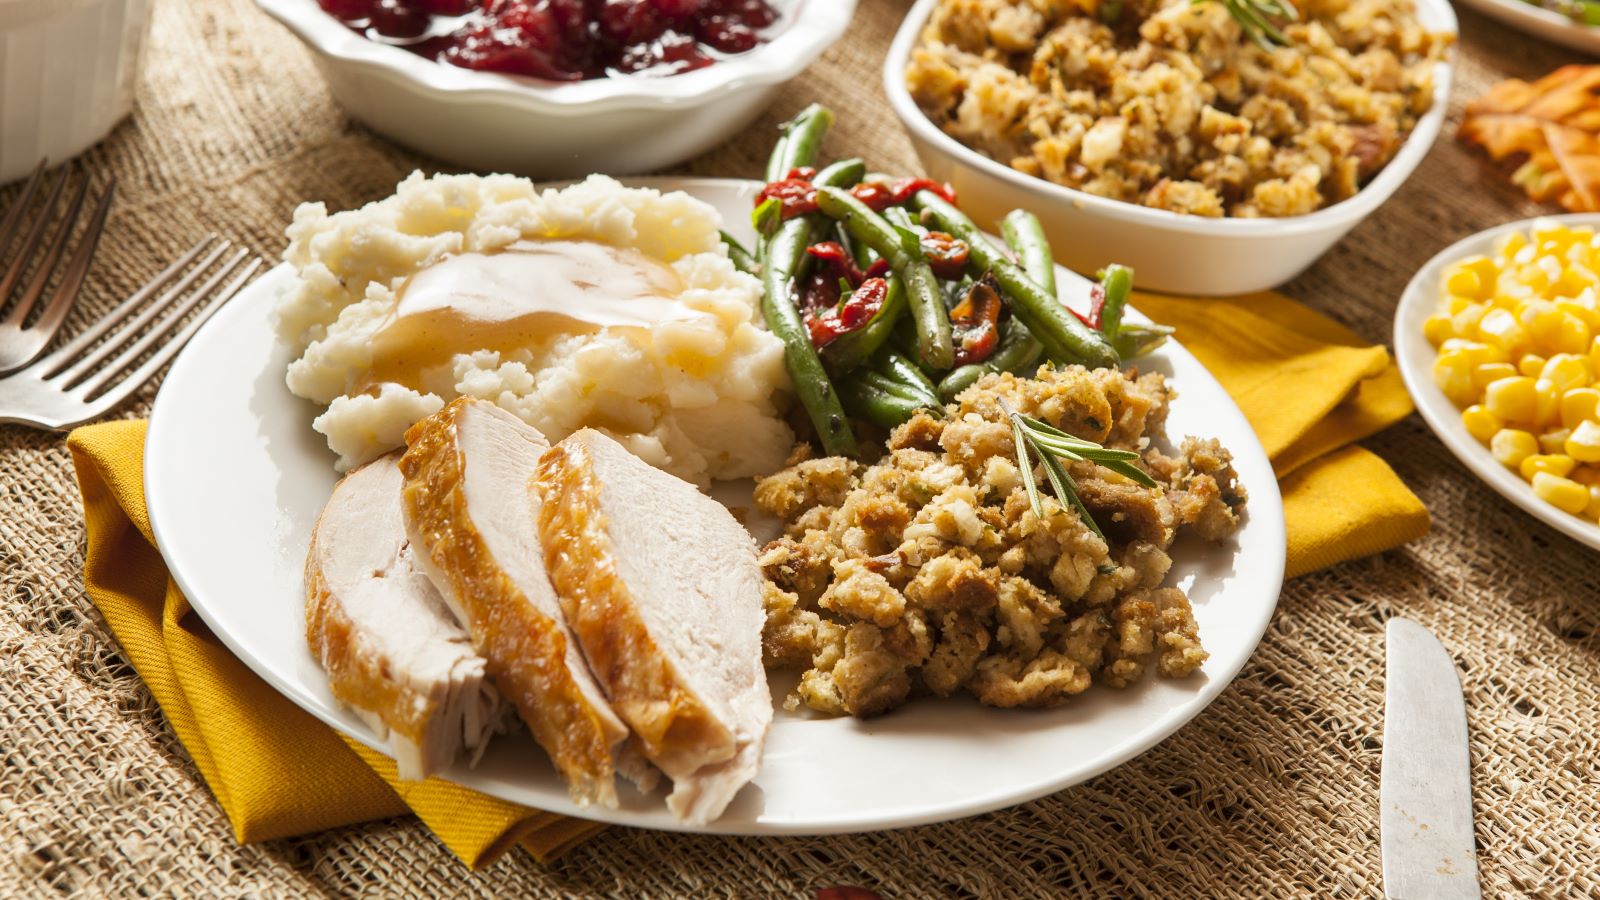 5 Healthy Changes for Your Thanksgiving Dinner